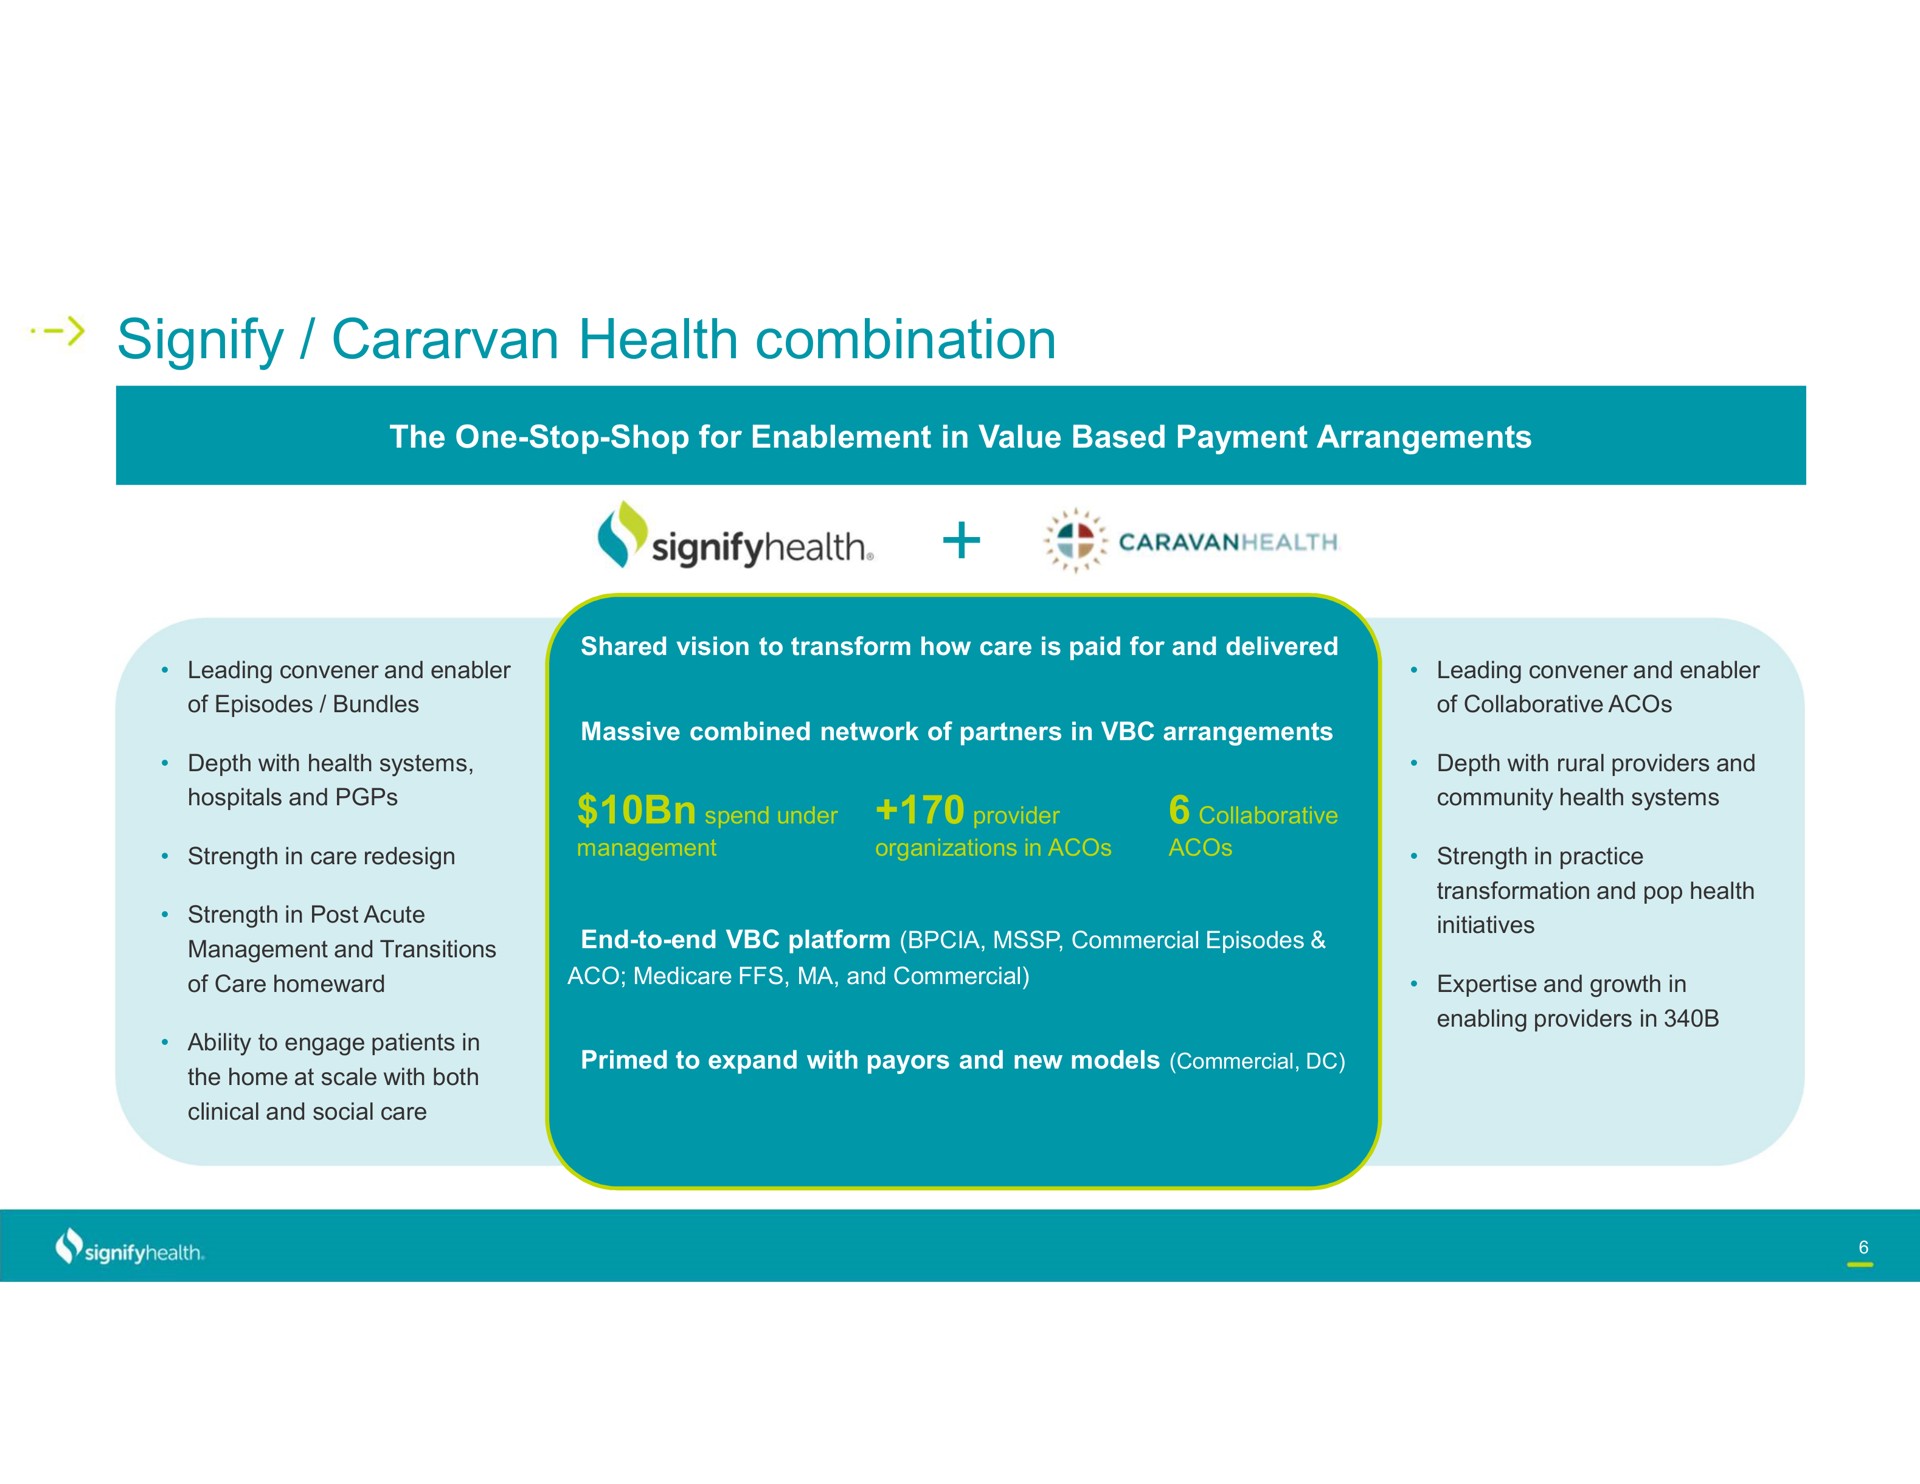 signify health combination | Signify Health